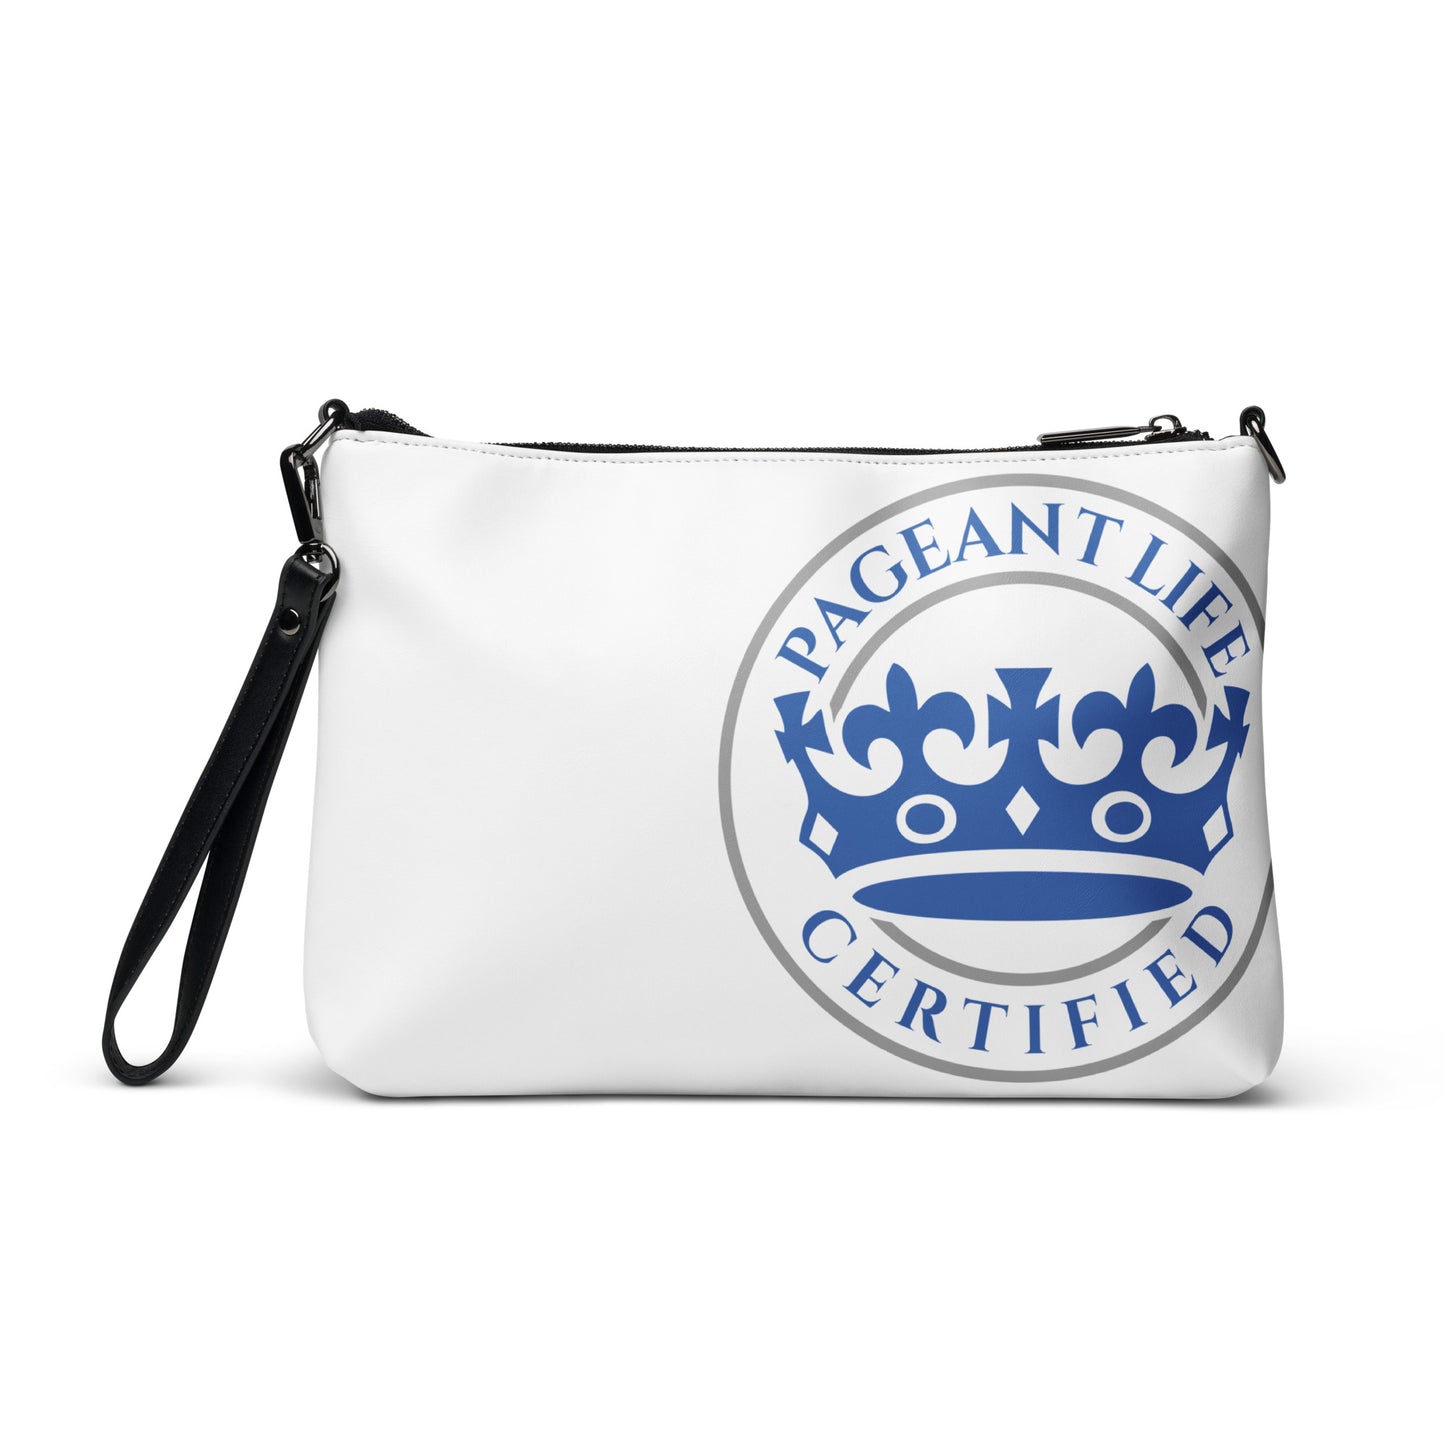 Blue Silver and White Pageant Life Certified Crossbody bag